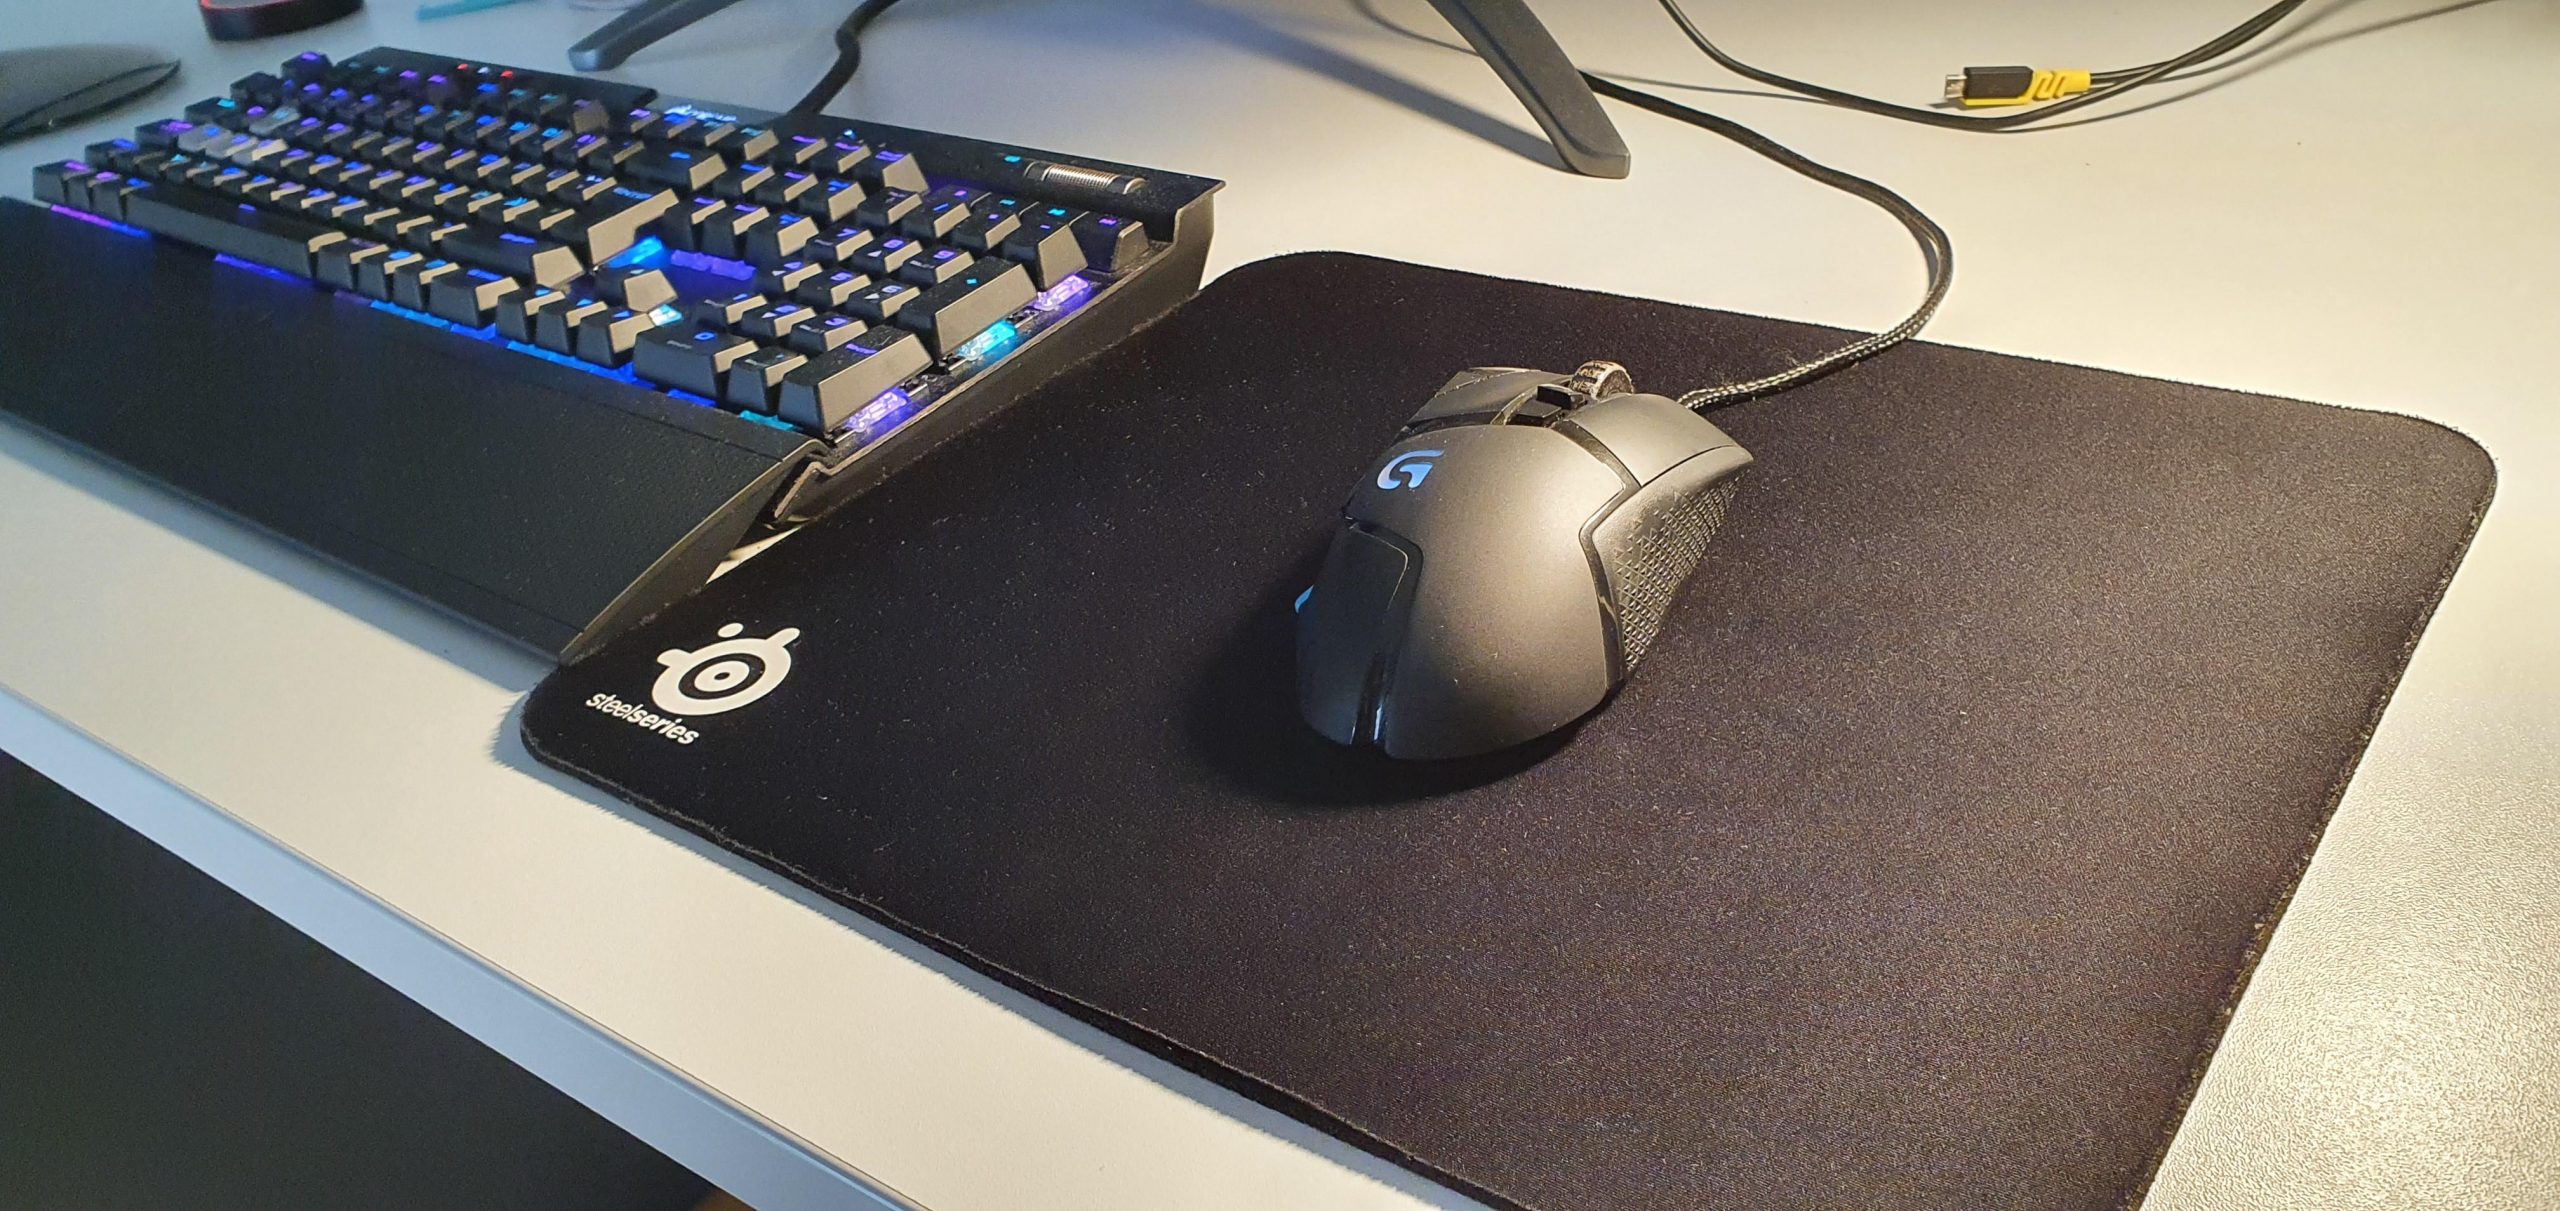 How to clean a mousepad